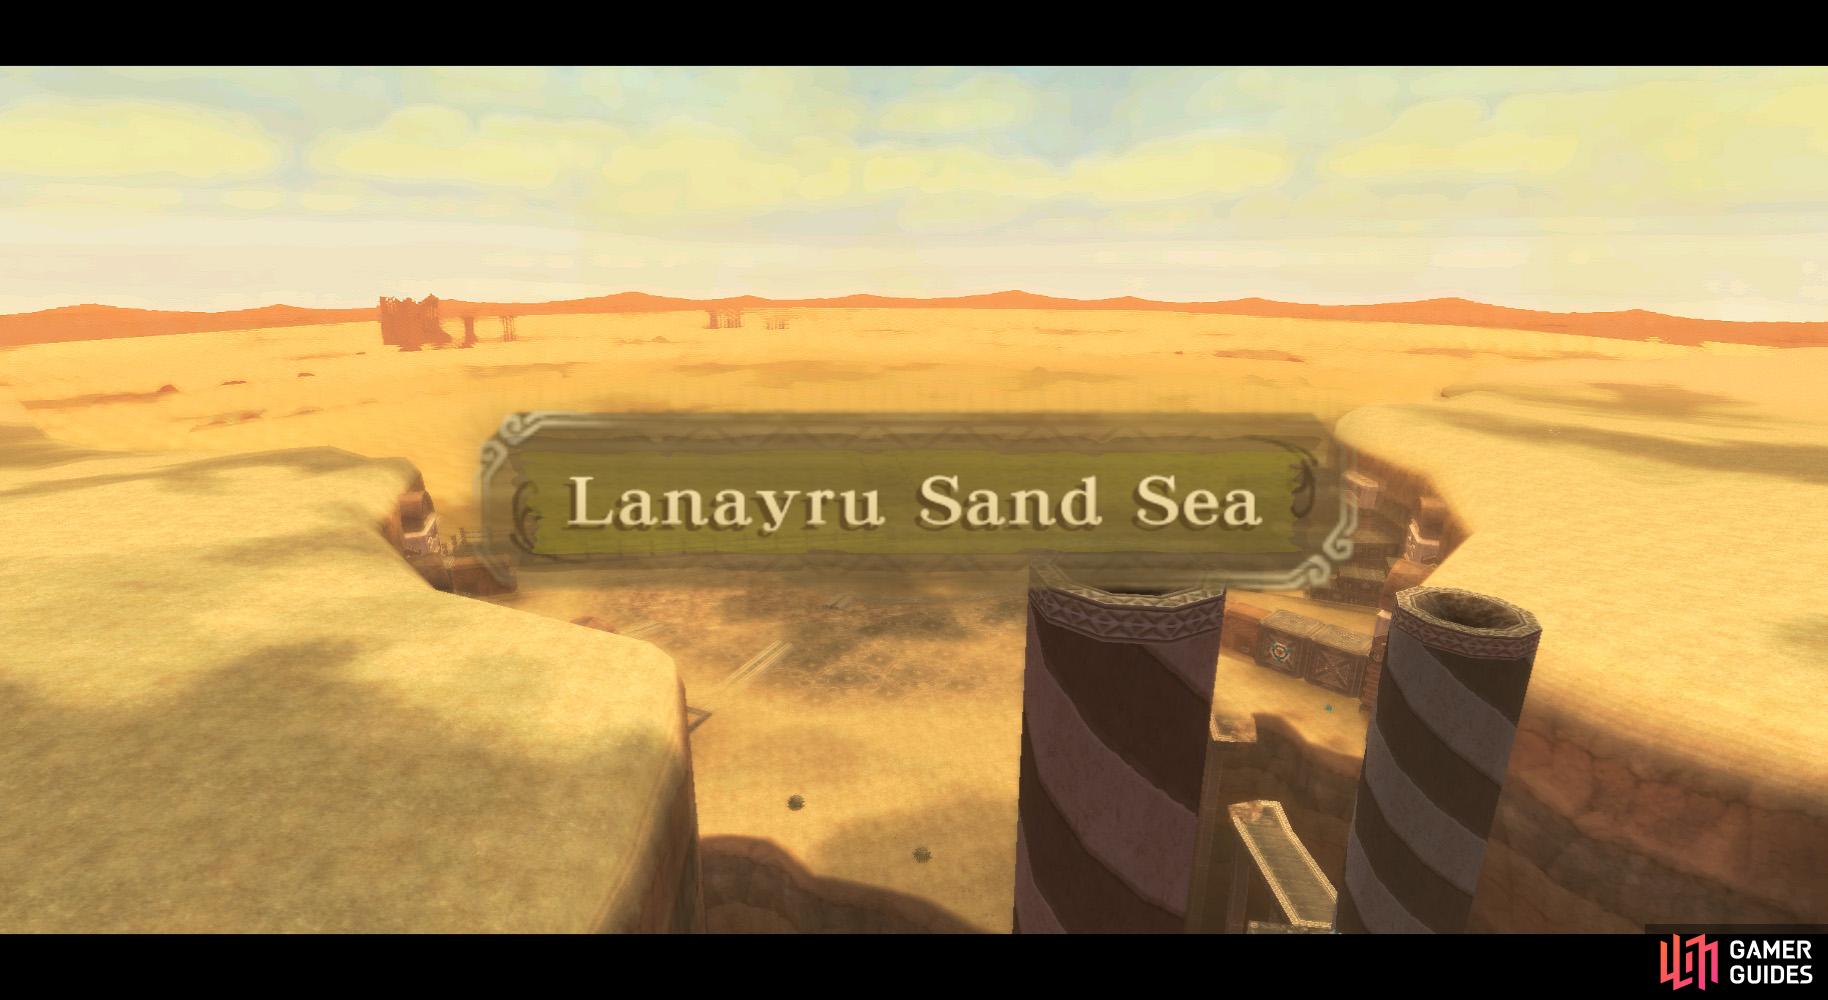 True to its name, the Sand Sea is nothing but sand for miles on end.